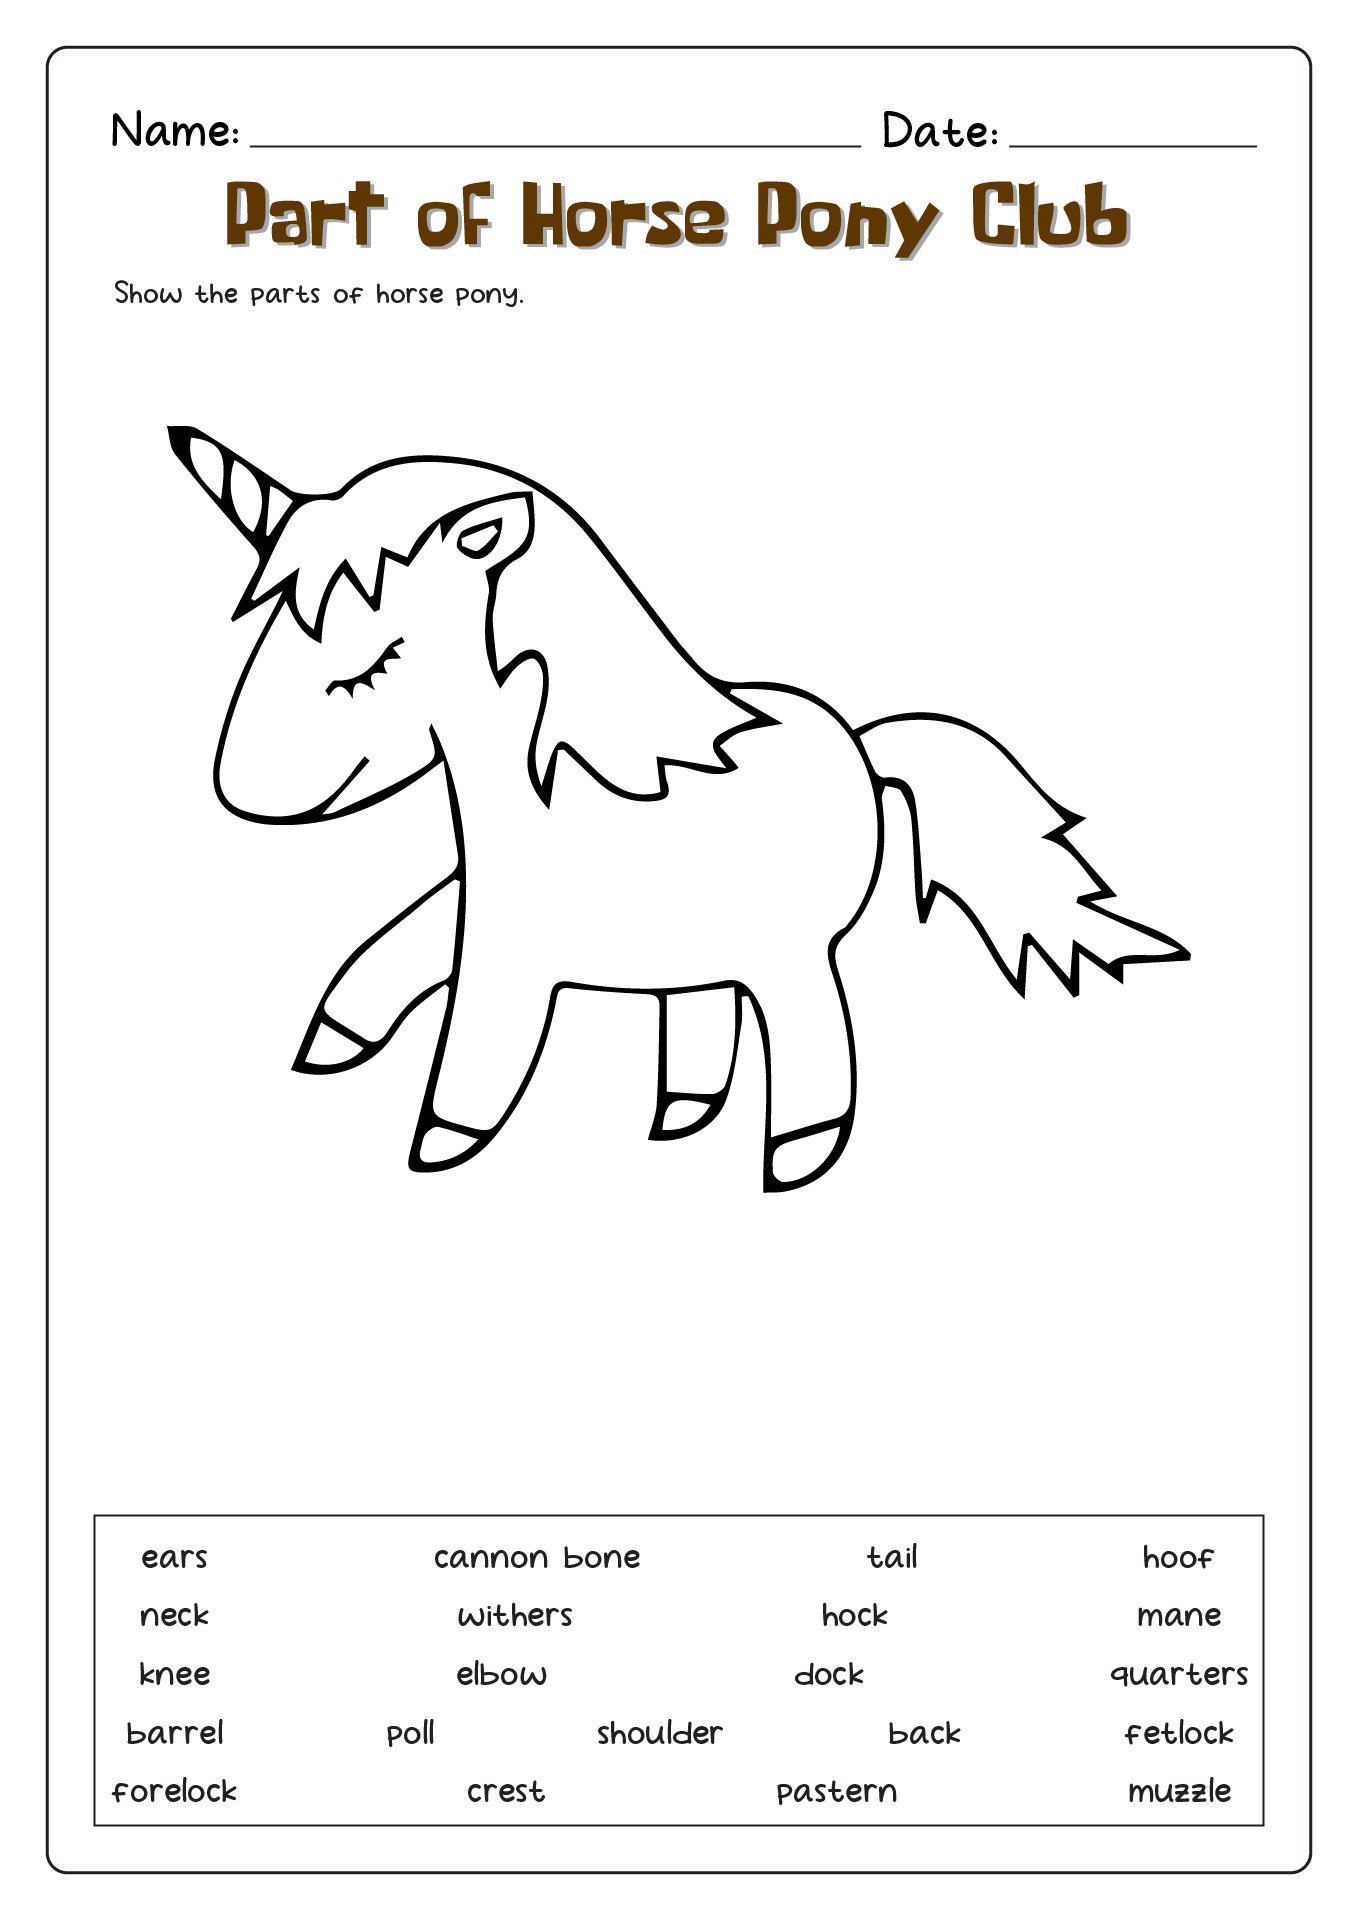 Worksheet Parts of a Horse Pony Club